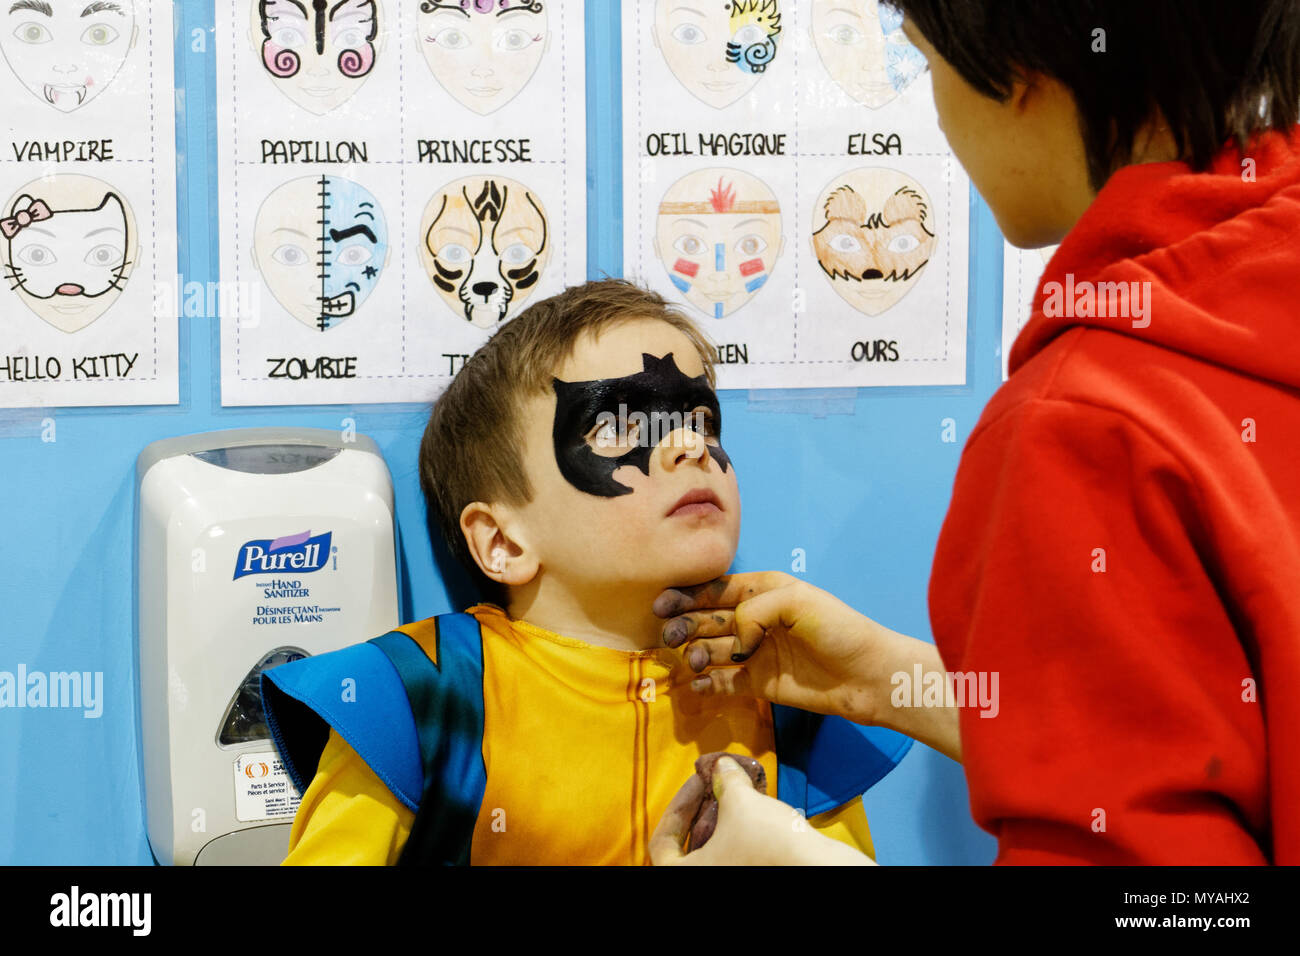 A woman doing a young boy (6 yrs old) face painting as Batman at a children's party Stock Photo